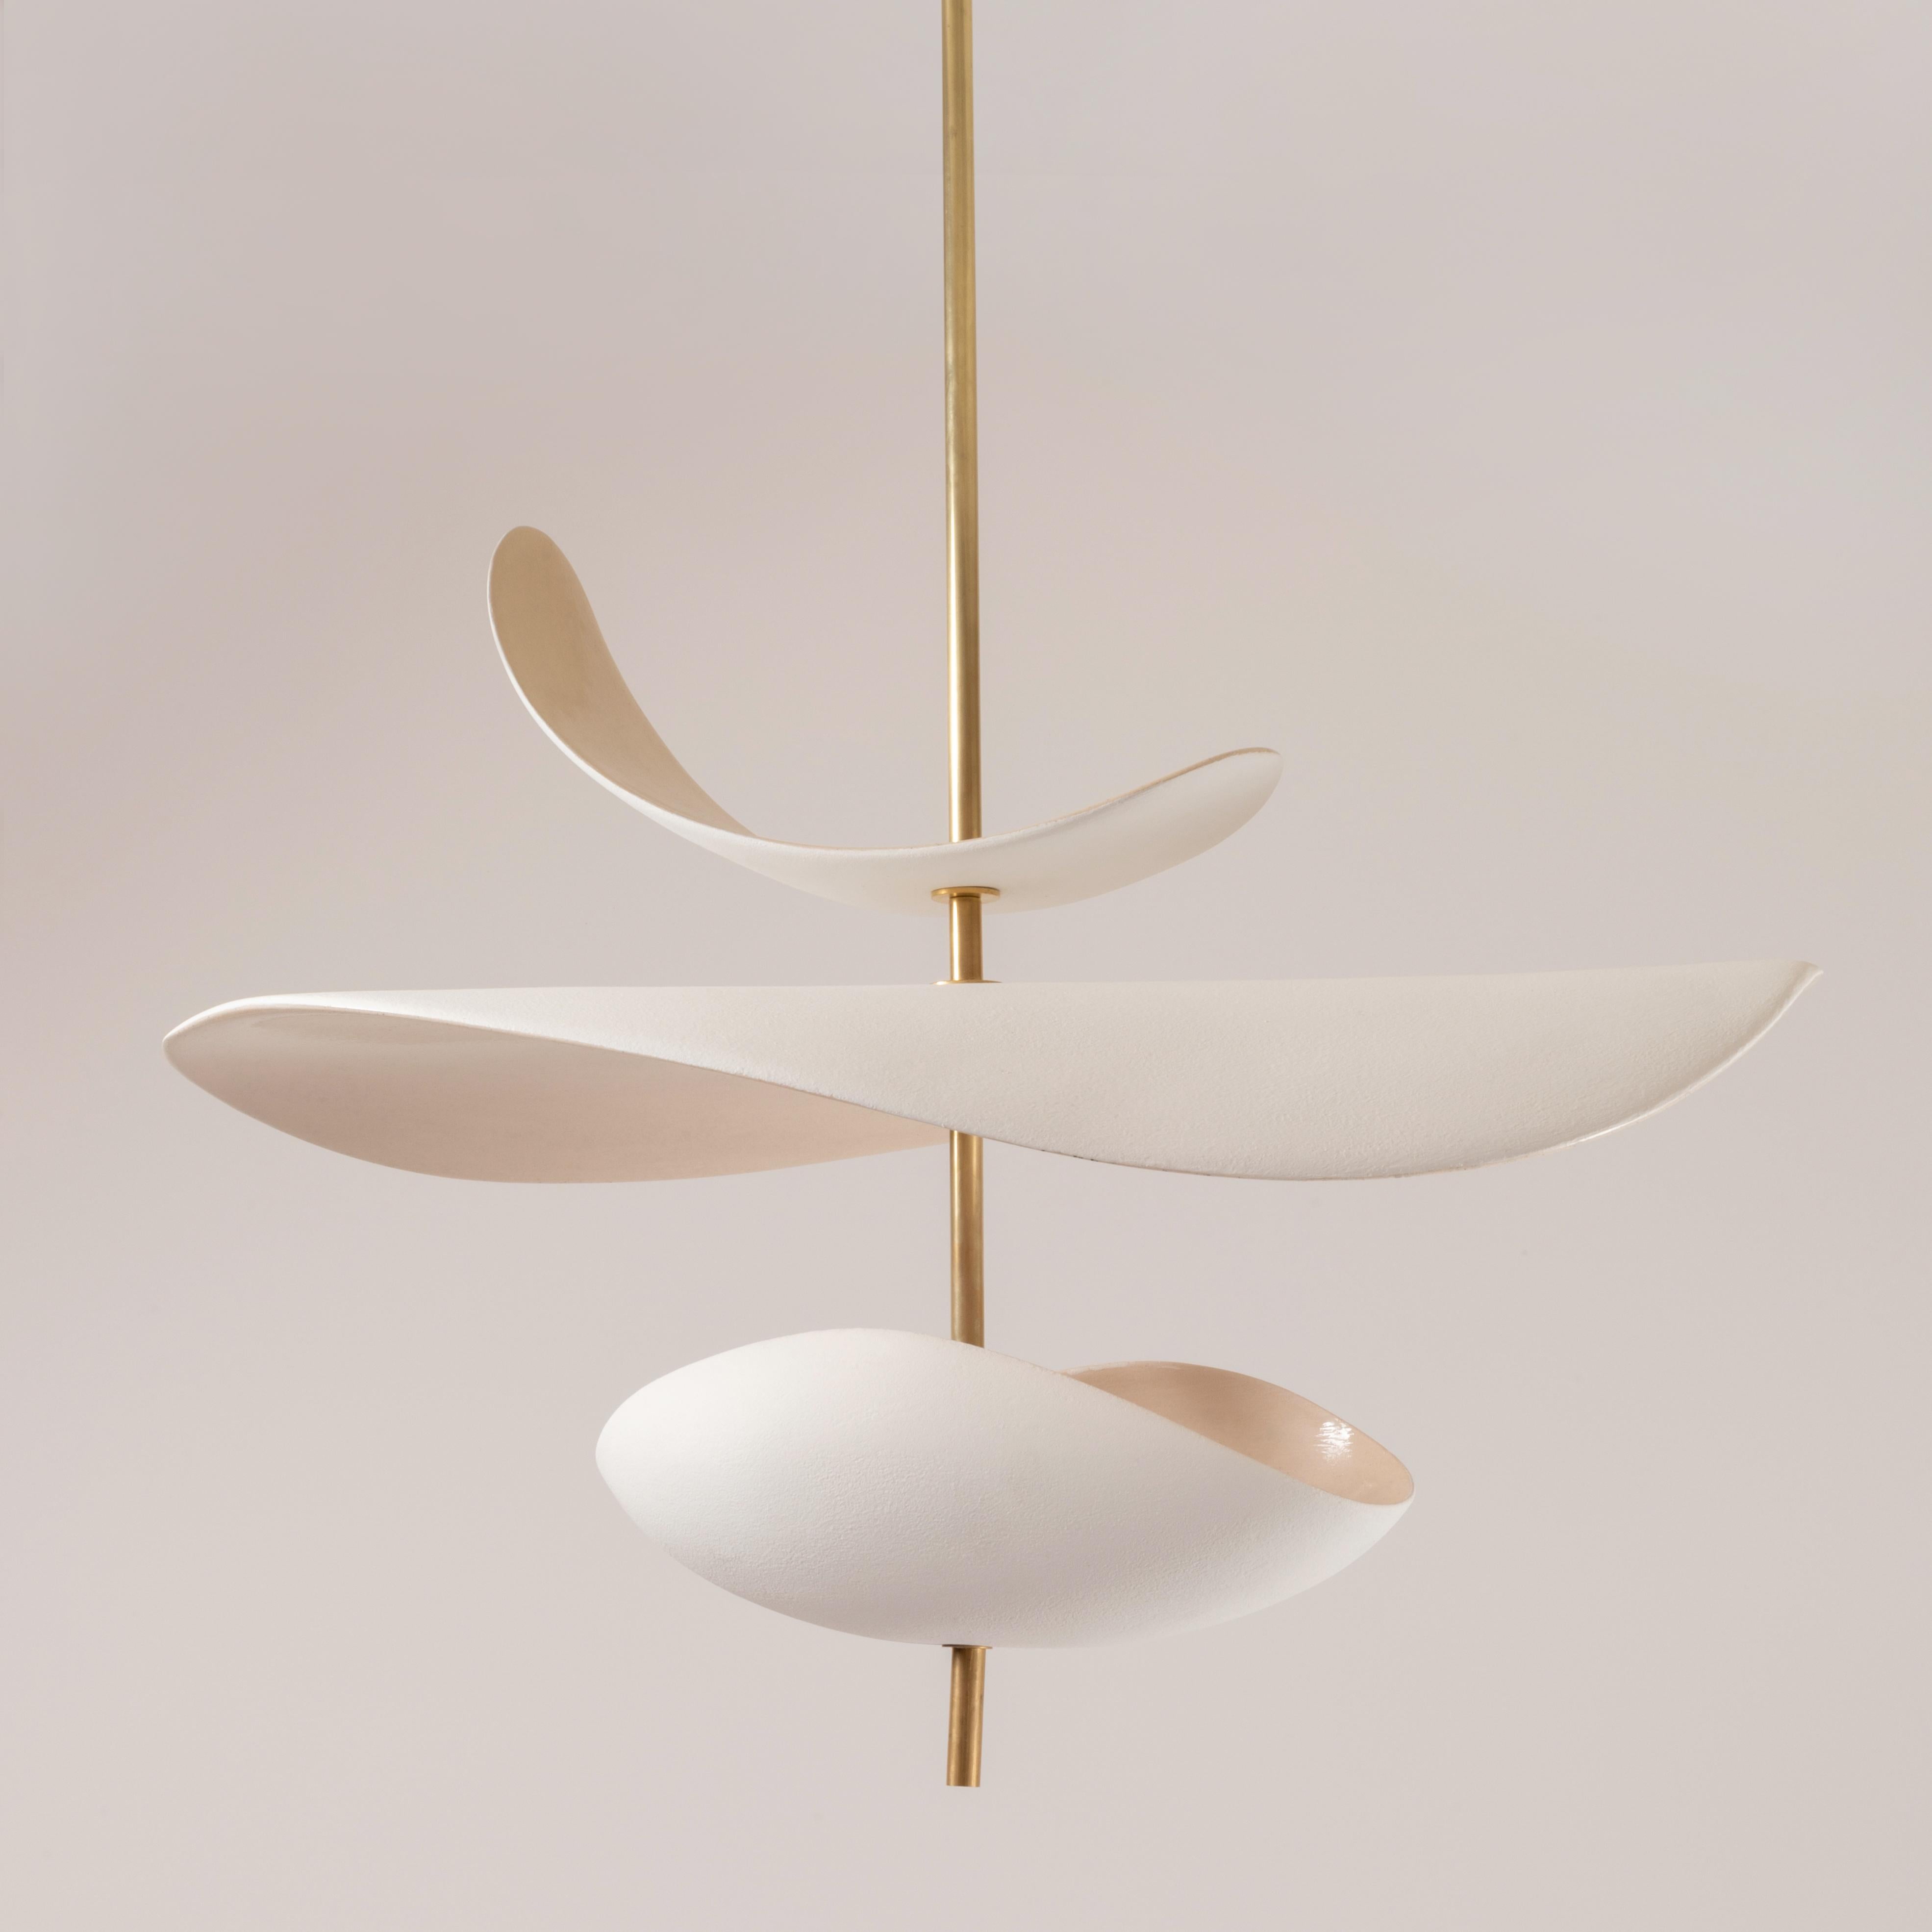 Antigone Pendant Lamp by Elsa Foulon
Standard size.
Dimensions: D 55-60 cm.
Materials: ceramic, brass.
Unique Piece
Also available in different options: bowl or cup (lower part).
The height is min 65 cm and customizable to the customer's size.